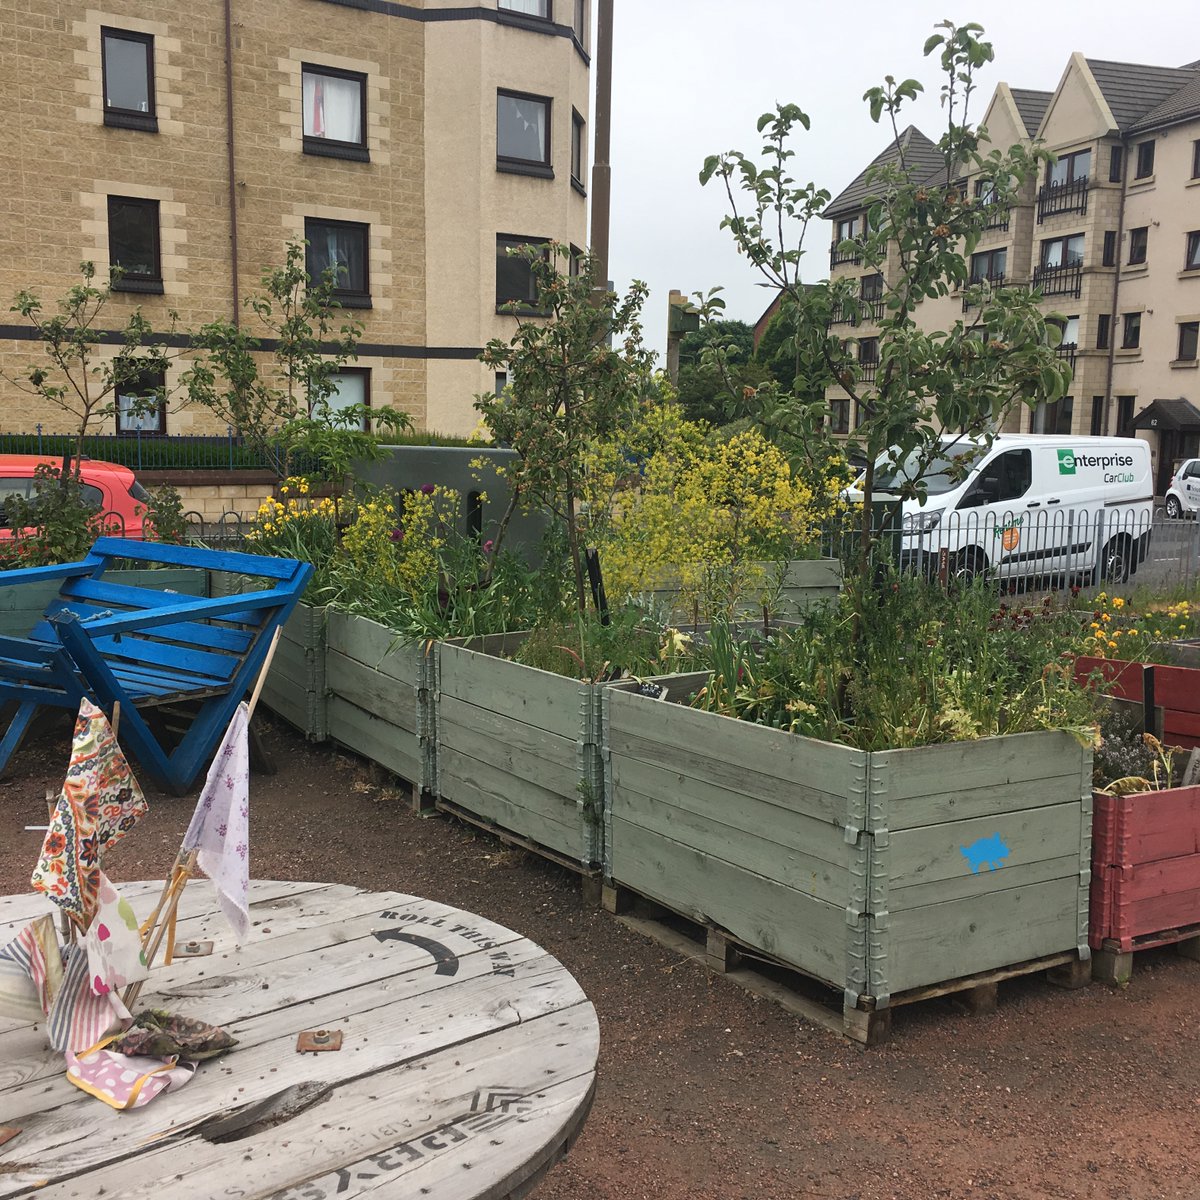 Community garden project in a disused car park